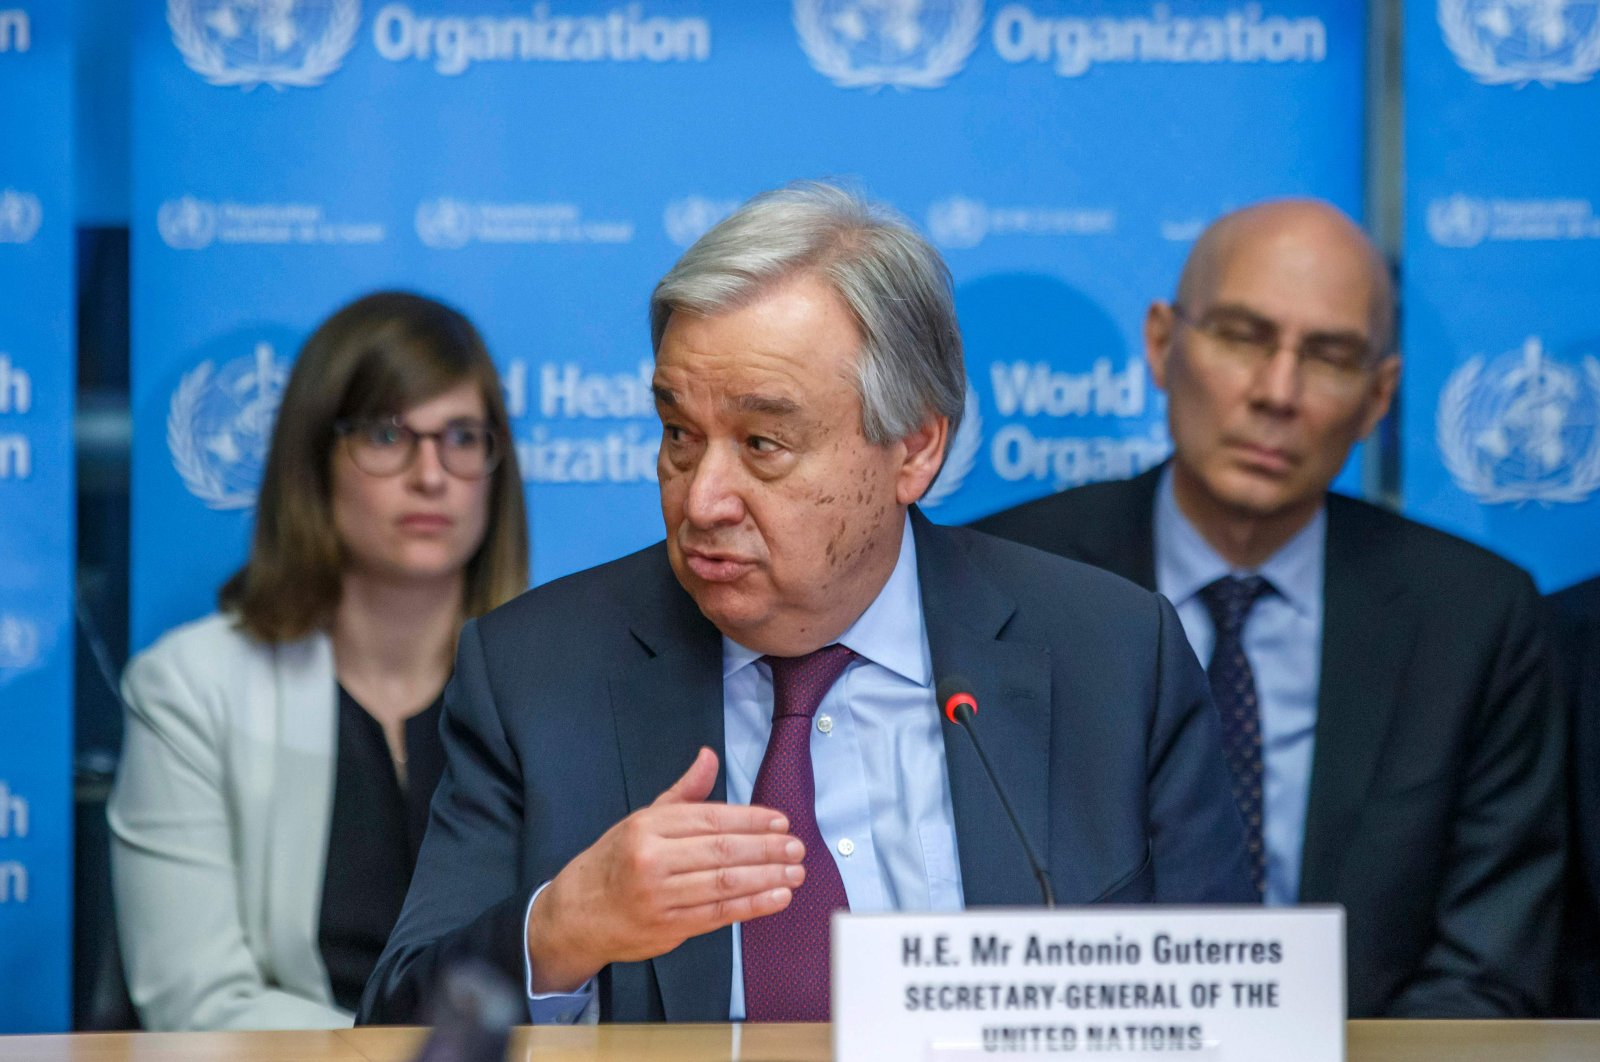 UN Secretary-General Antonio Guterres speaks during an update on the situation regarding the COVID-19 in the SHOC room (Strategic health operations centre) at the World Health Organization (WHO) headquarters in Geneva, Feb. 24, 2020. (AFP)